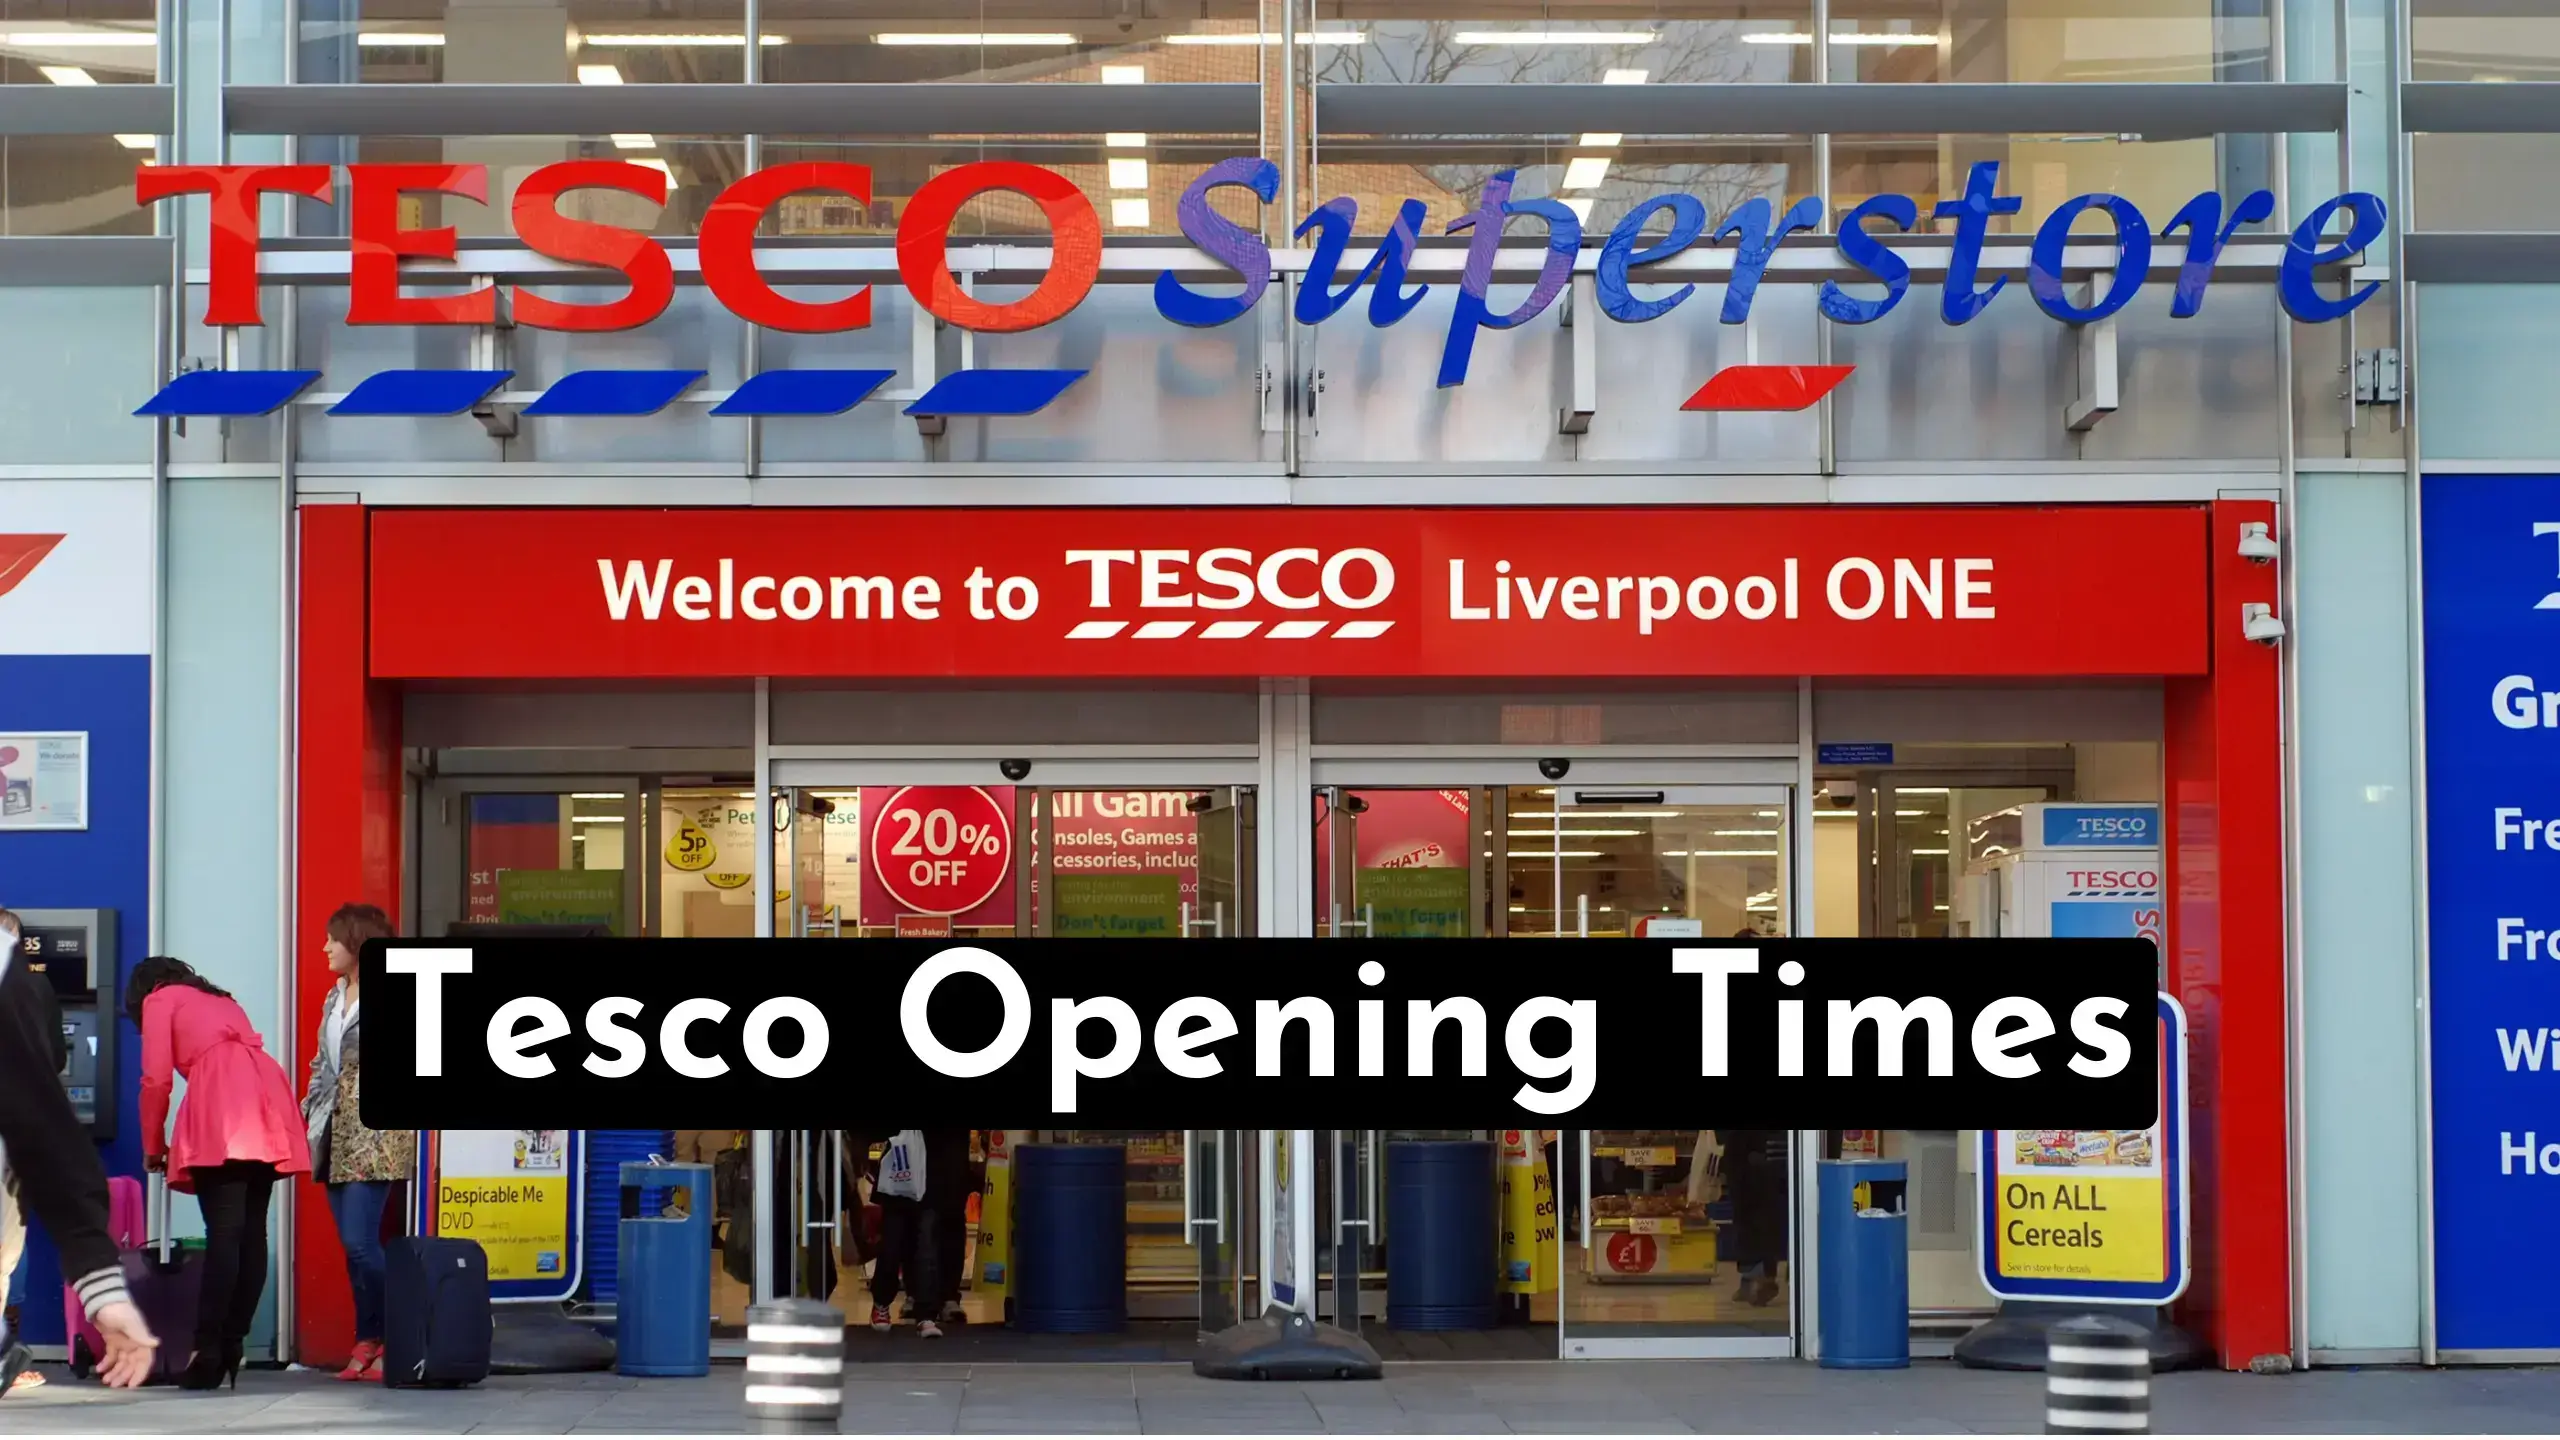 Find the right shopping time with Tesco Opening Times. Learn about peak hours, holiday schedules, and COVID-19 adjustments for a smoother experience.